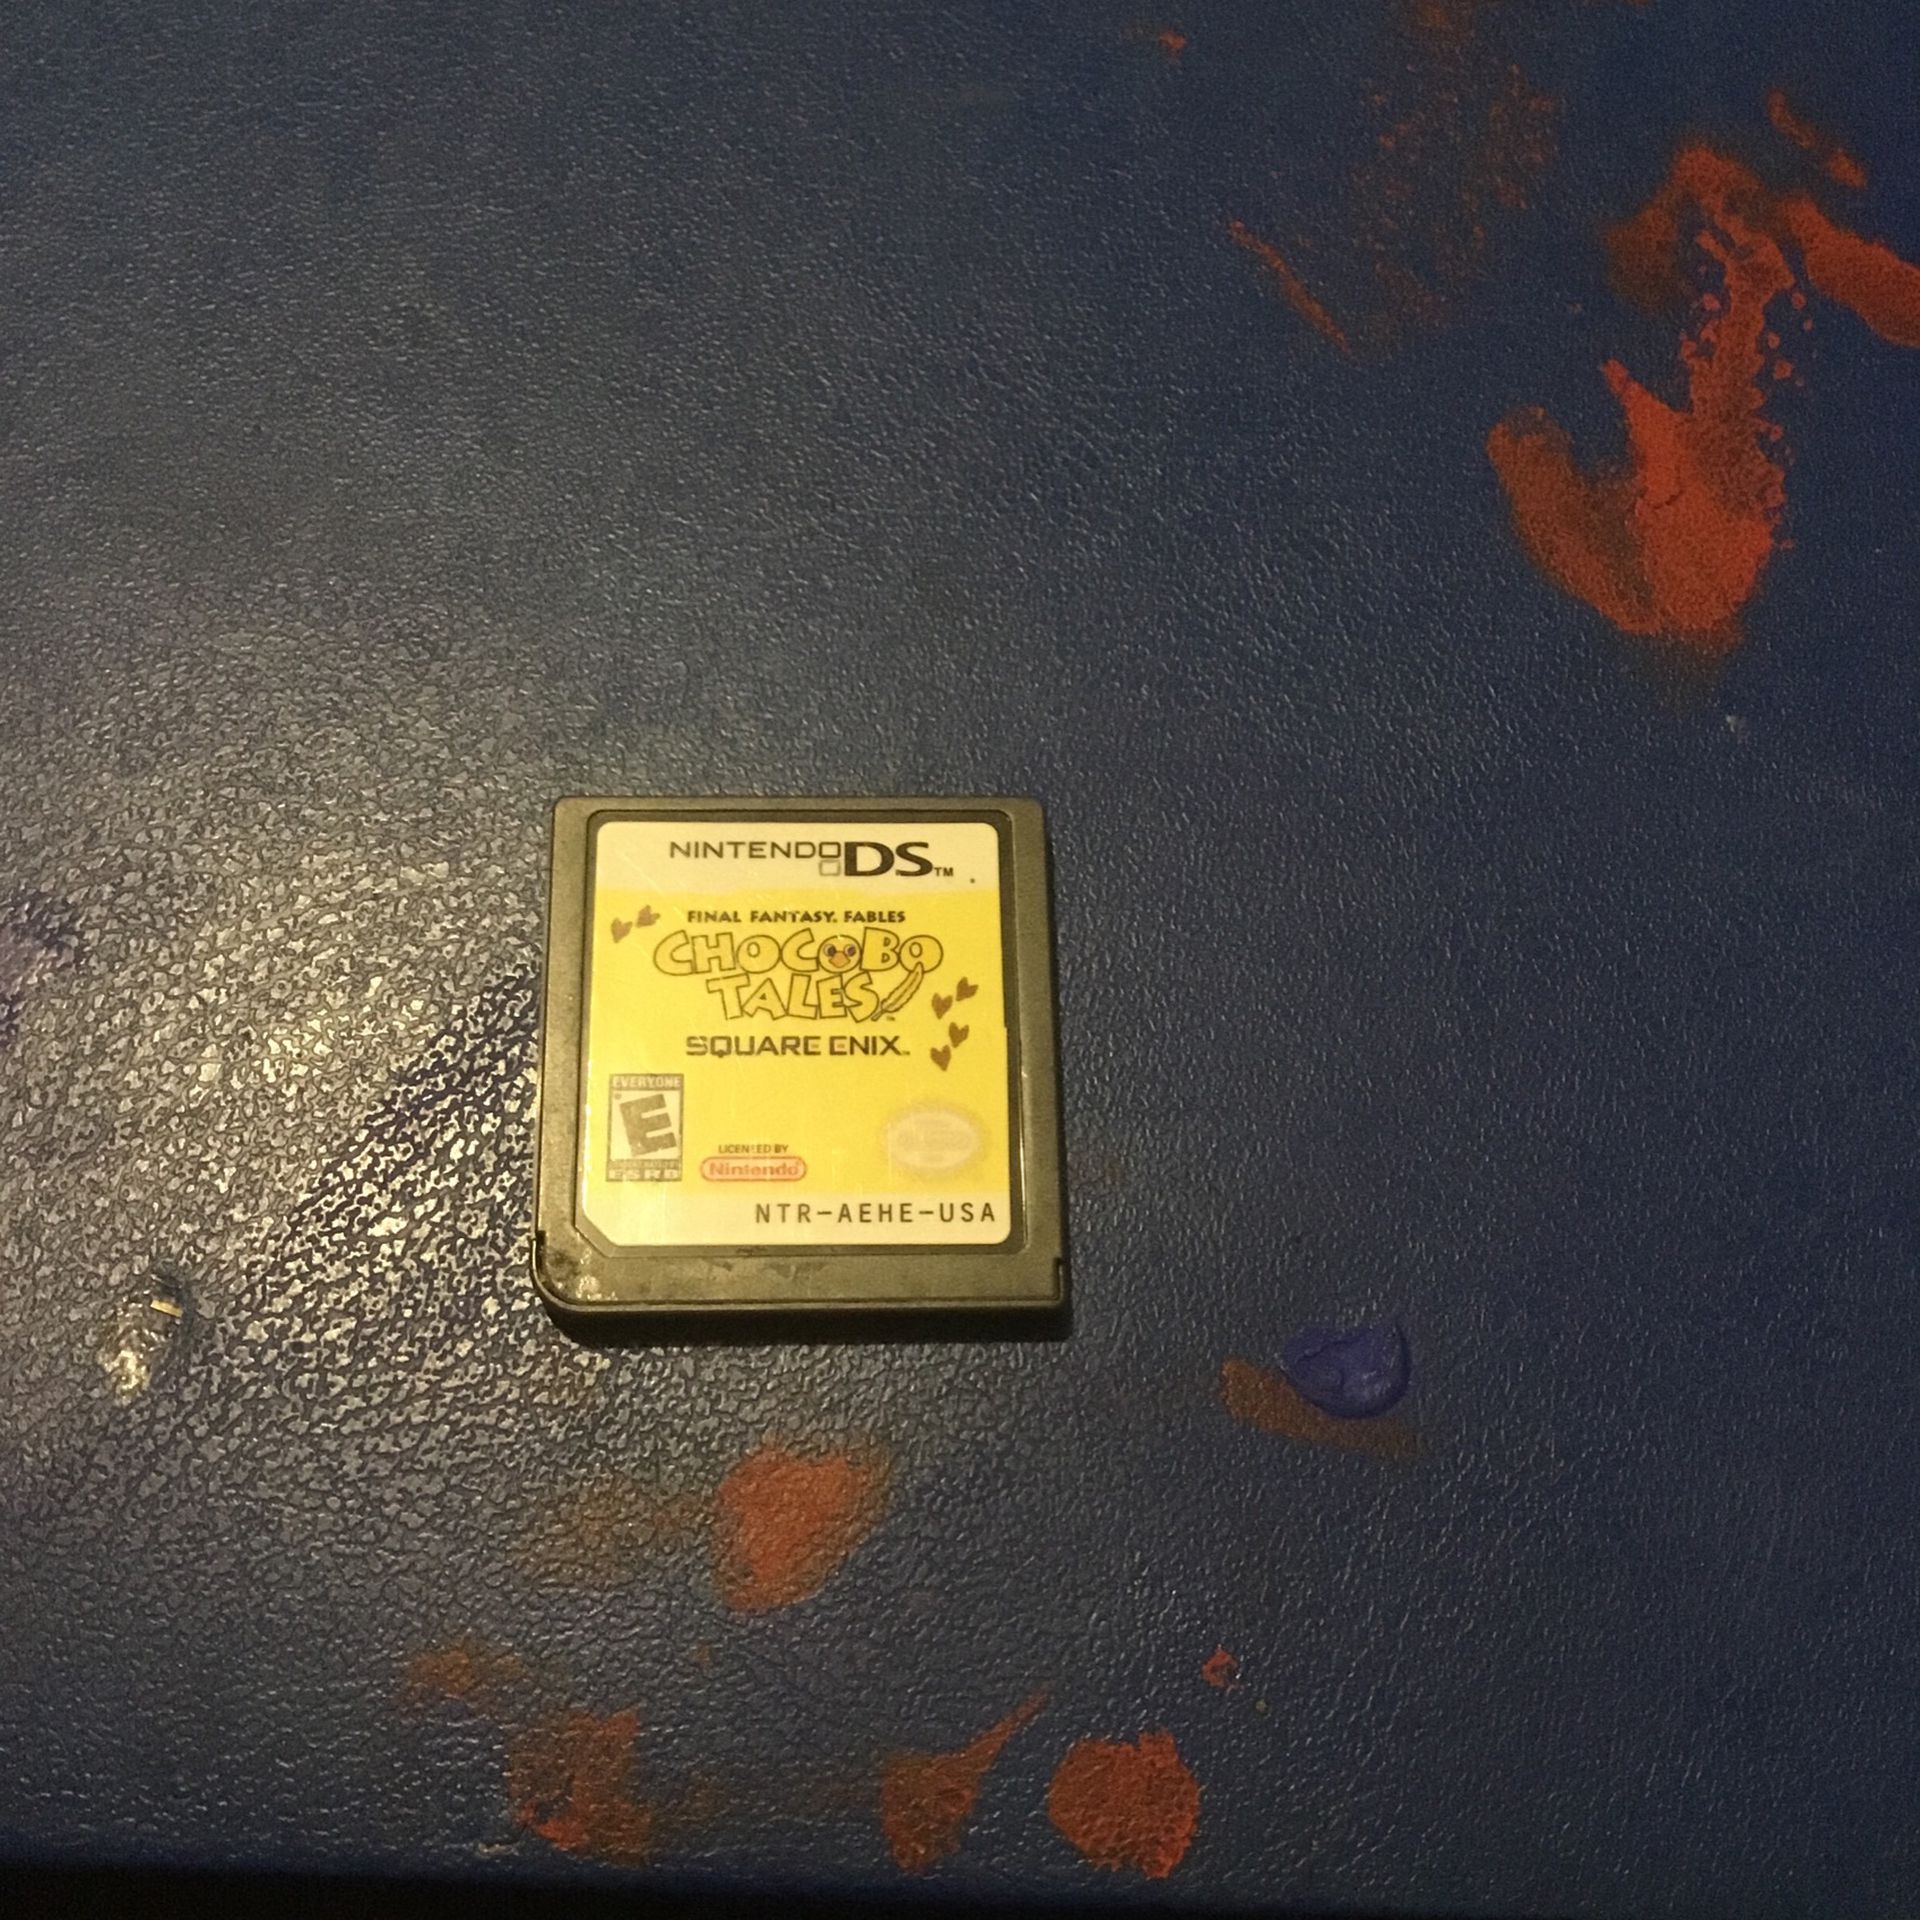 Nintendo DS Game Final Fantasy Fables Chocobo Tales